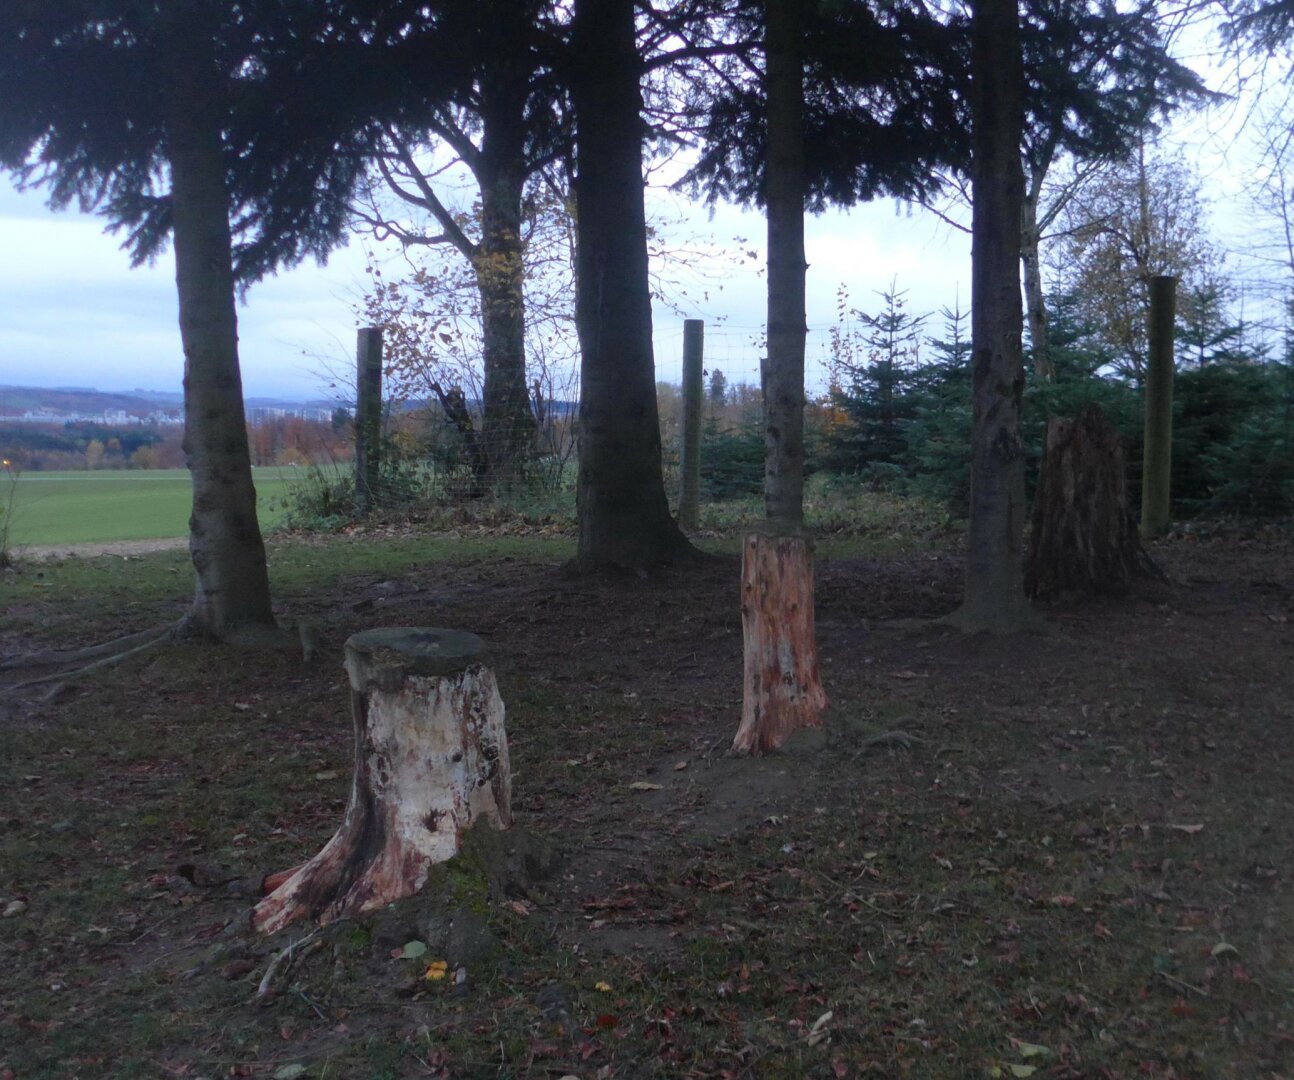 an image or two from my Pixelfed, shows two tree stumps and some fir trees